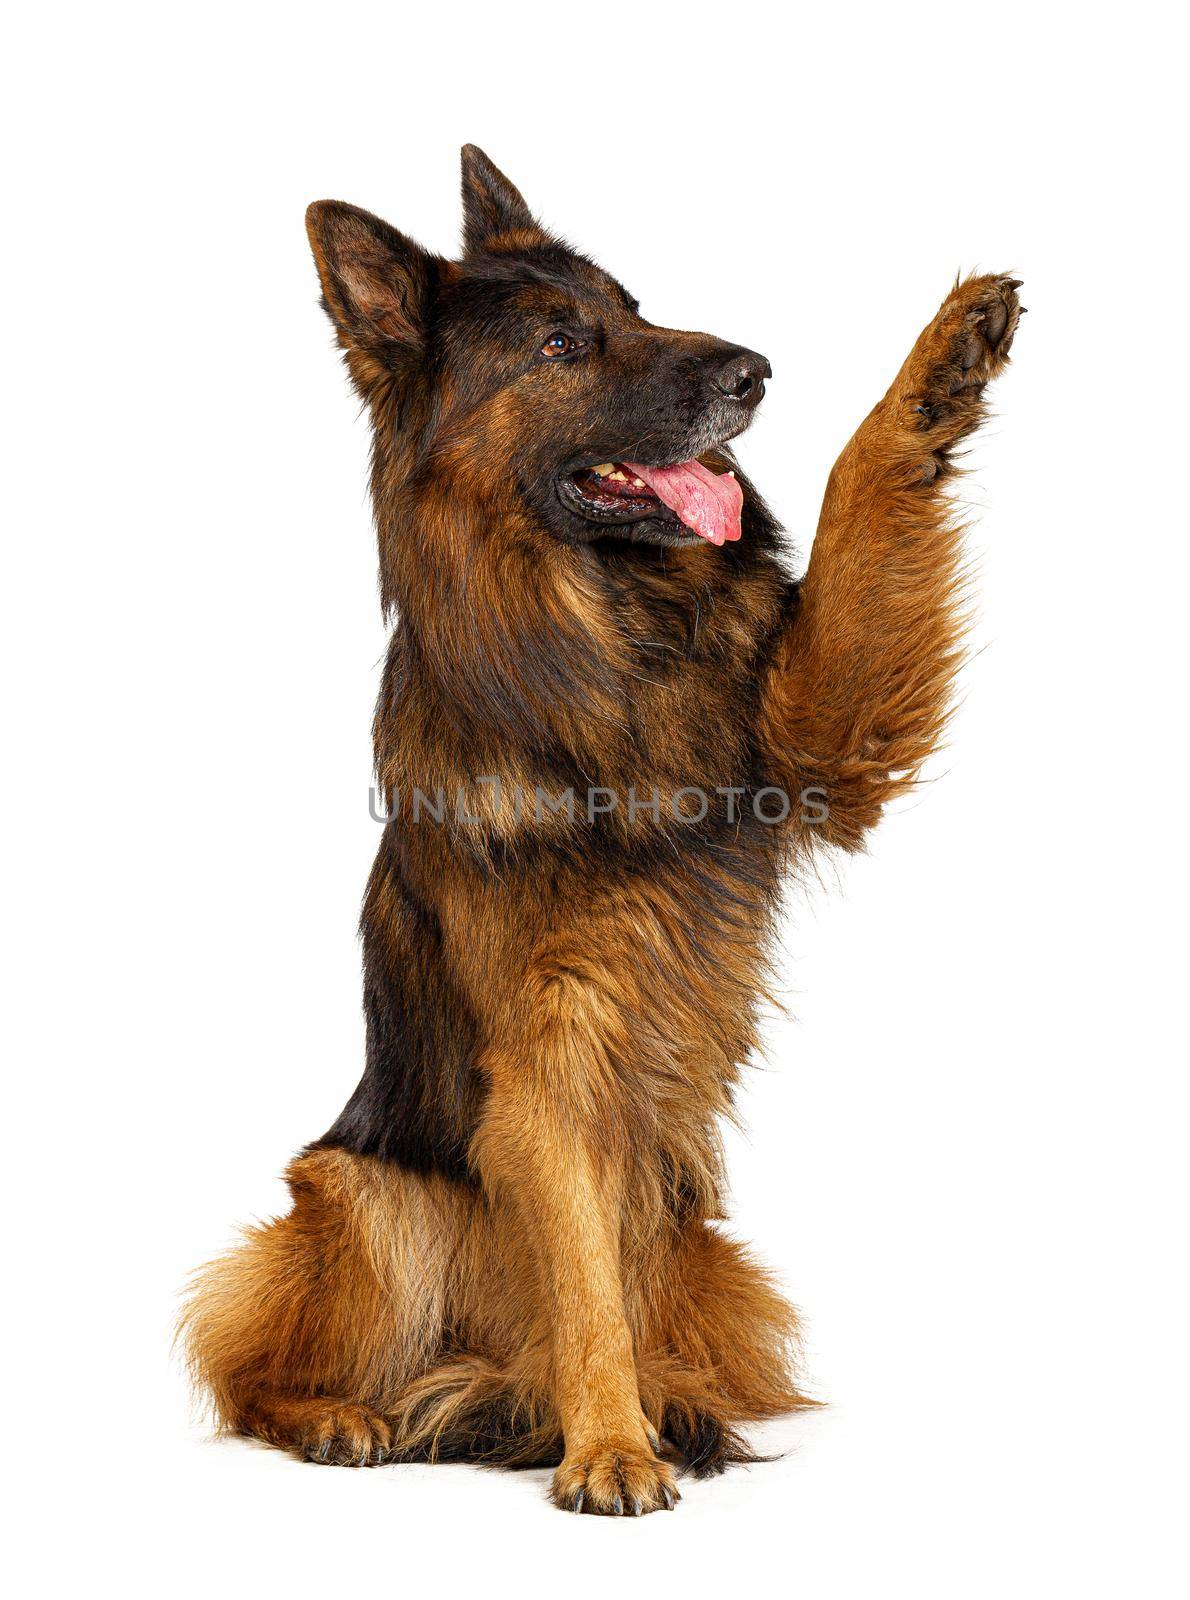 German shepherd dog with its paw up isolated on white background by Fabrikasimf